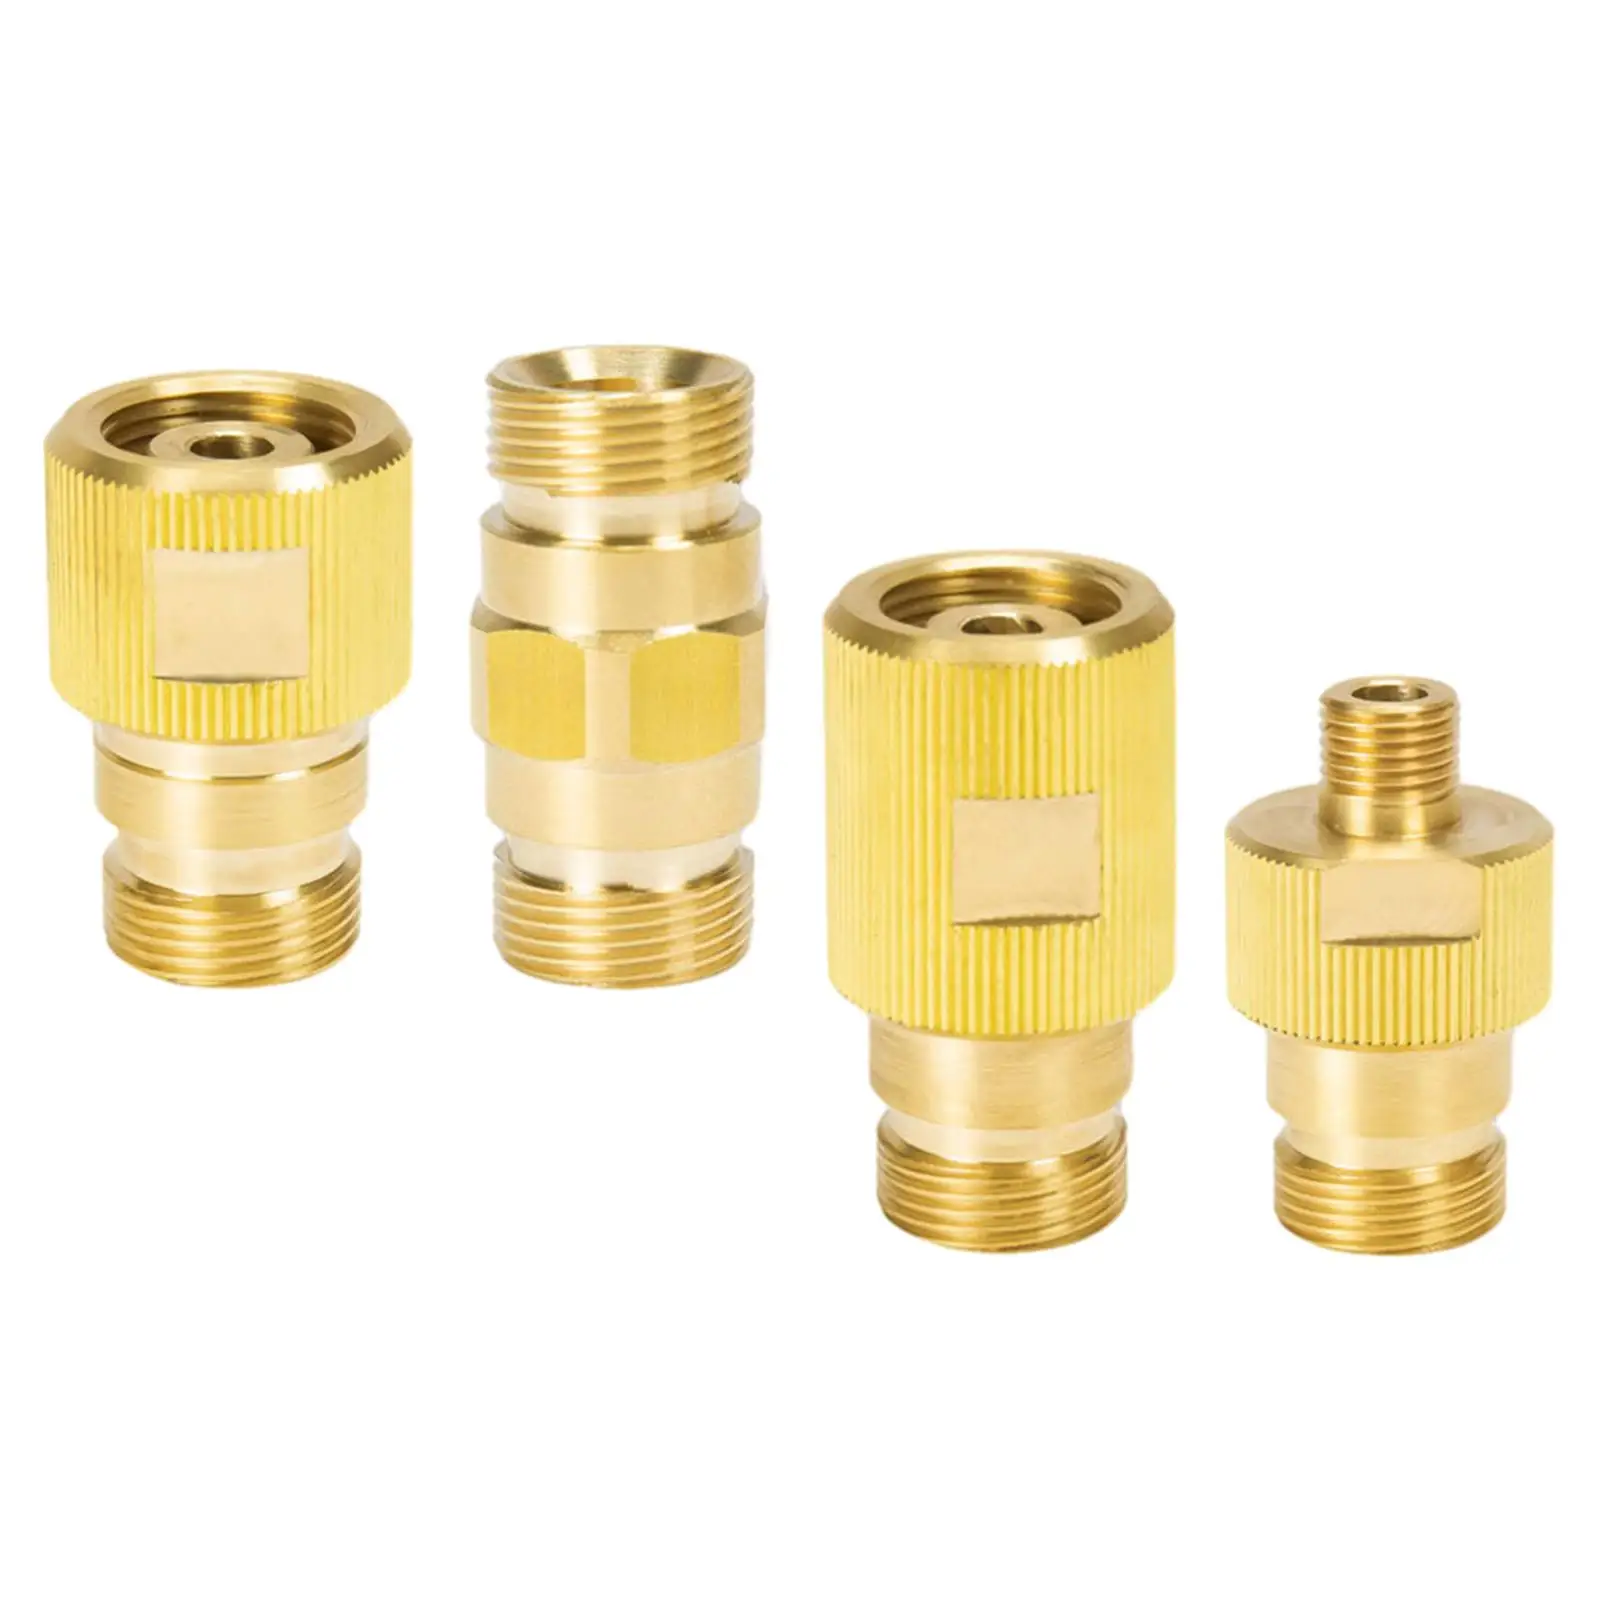 Pressure Washer Nozzle Quick Connect Power Tools Accessories Coupler for Lawns Care Watering Flowers Irrigate Cleaning Wash Cars